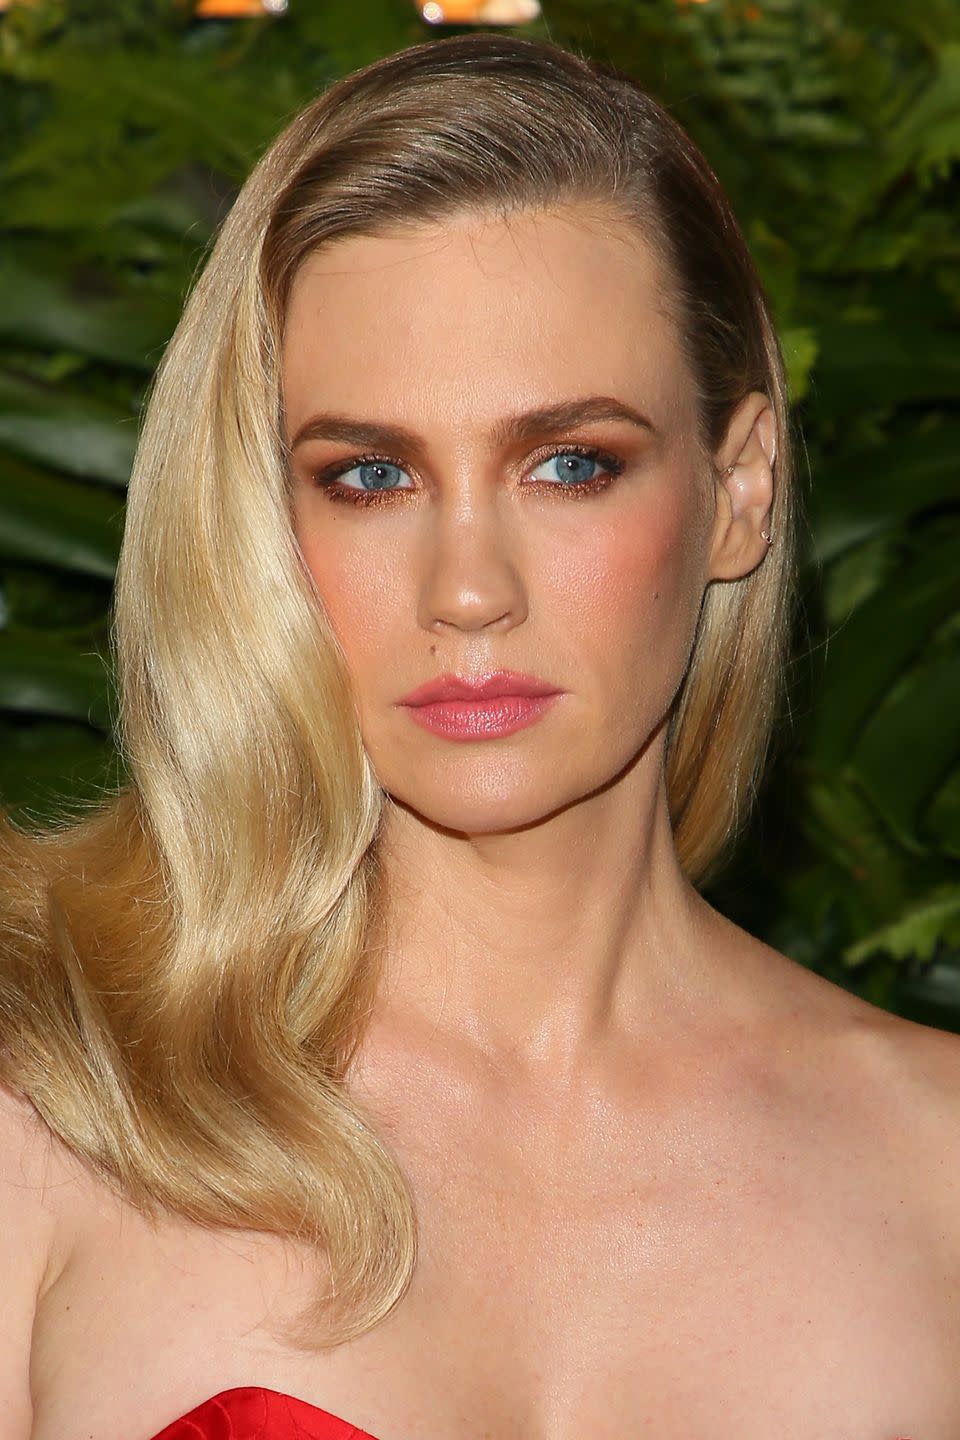 <p>Experiment with grown-up glitter by wearing it across both your lash lines like January Jones. Choose either a bronze glittery eyeshadow, as from Urban Decay's <a rel="nofollow noopener" href="https://www.urbandecay.co.uk/en_GB/palettes/naked-heat/3605971553936.html?gclid=CjwKCAjw1ZbaBRBUEiwA4VQCISE7KZH2hxYsAllX8AXUA9kFCyRll2PjpSmJzMH6jzcmp_jETzrm3RoCzfAQAvD_BwE&gclsrc=aw.ds&dclid=COG18qKPl9wCFcdj0wodgZEMFg" target="_blank" data-ylk="slk:Naked Heat Palette" class="link ">Naked Heat Palette</a>, £39.50, and apply it with Mac's <a rel="nofollow noopener" href="https://www.maccosmetics.co.uk/product/13804/820/products/brushes-tools/brushes/eye-brushes/231-small-shader-brush" target="_blank" data-ylk="slk:Shader Brush" class="link ">Shader Brush</a>, £16.50, or try using Stila's <a rel="nofollow noopener" href="https://www.cultbeauty.co.uk/stila-cosmetics-magnificent-metals-glitter-glow-liquid-eye-shadow.html?variant_id=9782" target="_blank" data-ylk="slk:Magnificent Metals Liquid Eye Shadow in Bronzed Bell" class="link ">Magnificent Metals Liquid Eye Shadow in Bronzed Bell</a>, £23, for guaranteed precision. To add further radiance, apply a touch of Nars' <a rel="nofollow noopener" href="https://narscosmetics.co.uk/en_GB/blush?gclid=CjwKCAjw1ZbaBRBUEiwA4VQCIZBqJKC6Tt8-0nHhO0WzRNlVUROtXJPQi7dfVmmUc1TbfRE6cOICiBoCH1EQAvD_BwE&gclsrc=aw.ds" target="_blank" data-ylk="slk:Highlighting Blush in Albatross" class="link ">Highlighting Blush in Albatross</a>, £24, to your tear ducts too.</p>